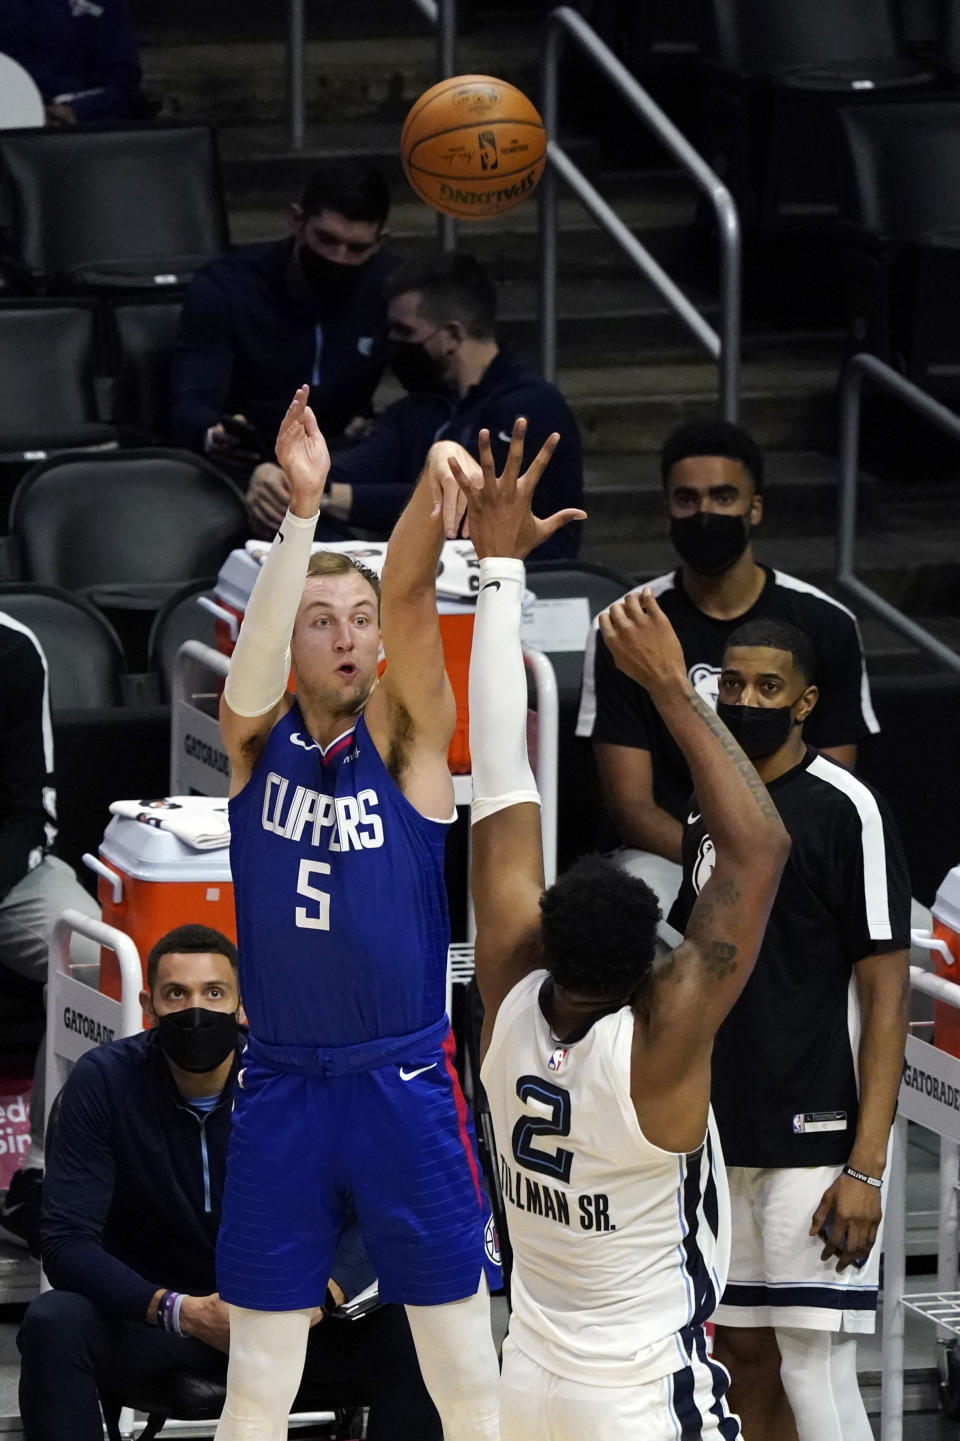 Los Angeles Clippers guard Luke Kennard (5) shoots over Memphis Grizzlies center Xavier Tillman (2) during the first half of an NBA basketball game Wednesday, April 21, 2021, in Los Angeles. (AP Photo/Marcio Jose Sanchez)